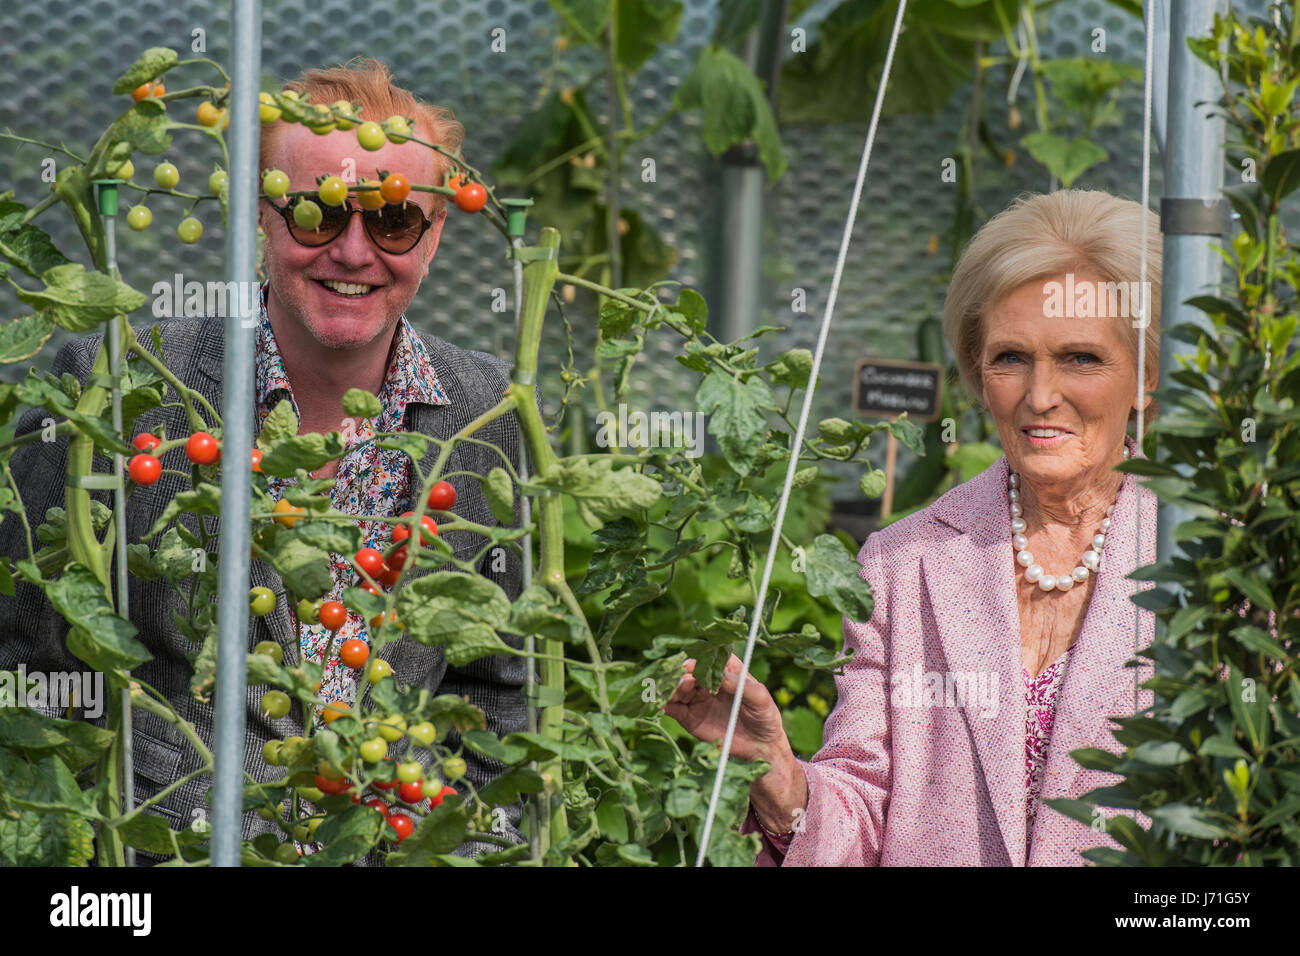 London, UK. 22nd May, 2017. Chris Evans and Mary Berry in his Taste Garden - The Chelsea Flower Show organised by the Royal Horticultural Society with M&G as its main sponsor for the final year. Credit: Guy Bell/Alamy Live News Stock Photo